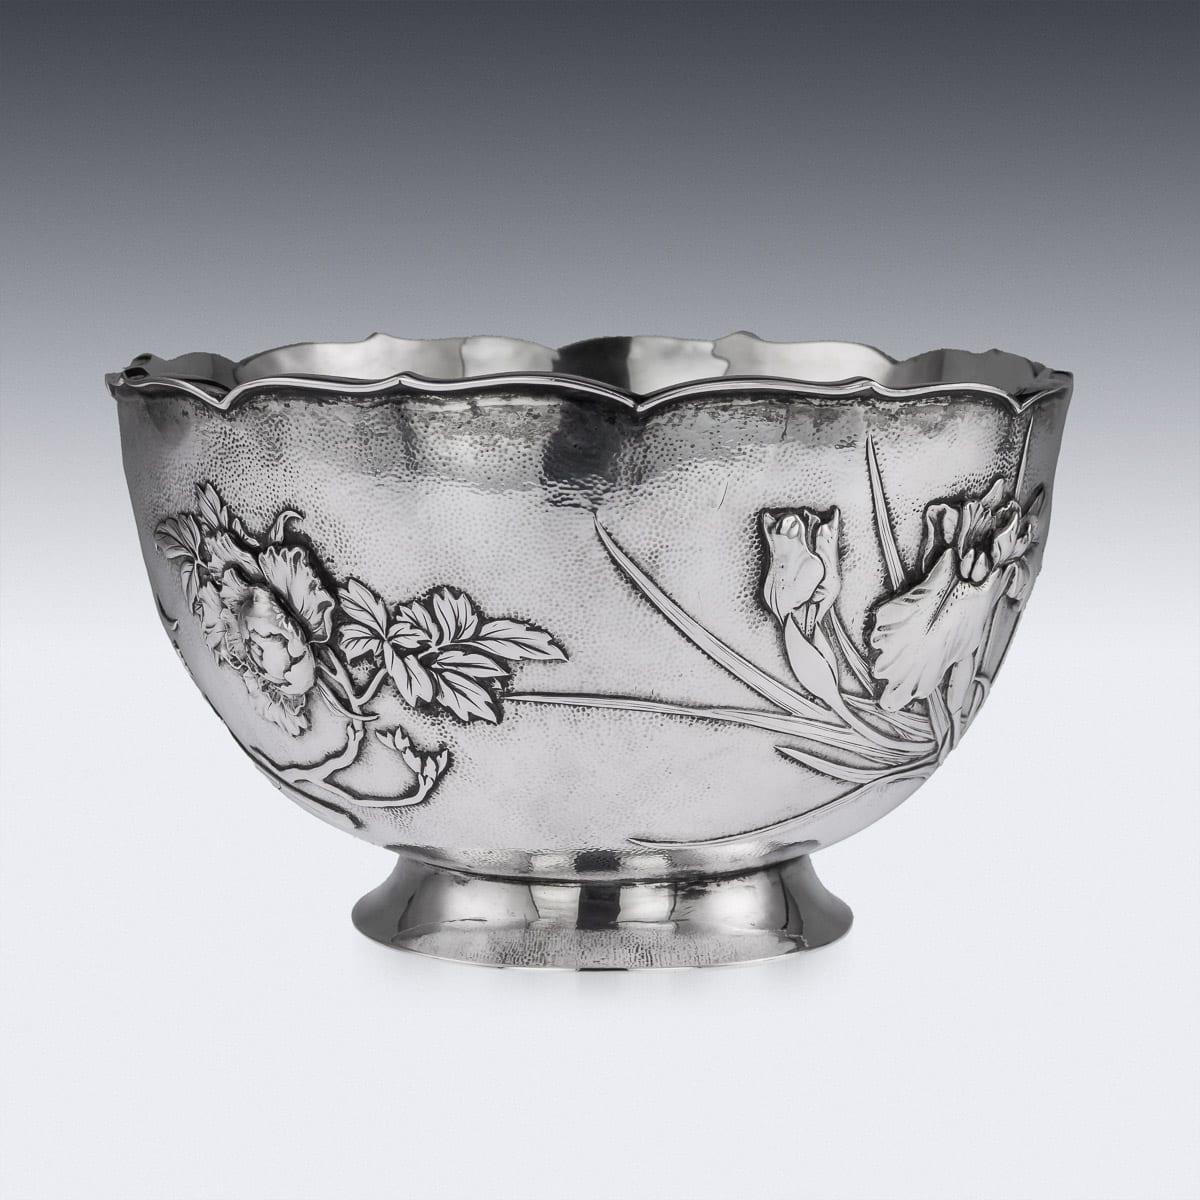 Antique early 20th century Japanese Meiji period solid silver bowl, oval shaped, double walled, chased and embossed with blossoming irises and chrysanthemum in high relief on matted ground, shaped floral rim applied with a pronounced boarder and